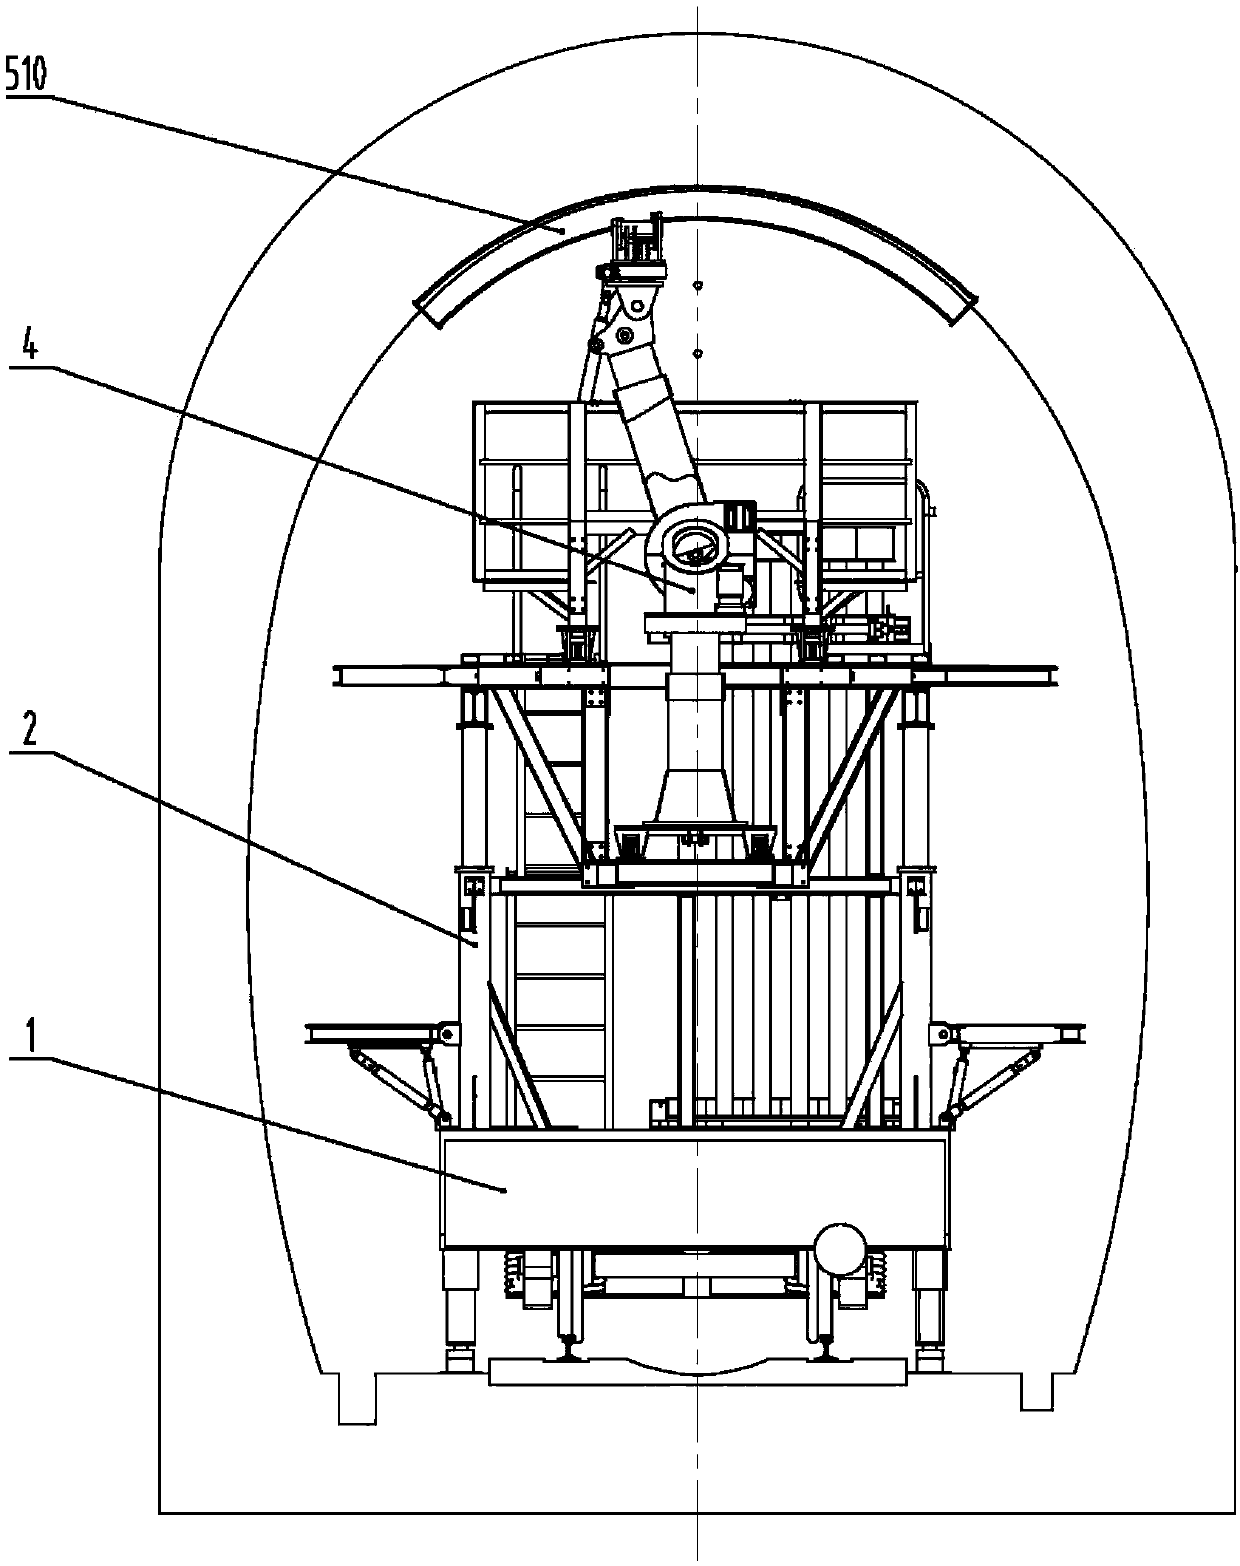 Steel arch frame mounting trolley used for operation tunnel disease treatment and steel arch frame mechanical mounting method used for operation tunnel disease treatment